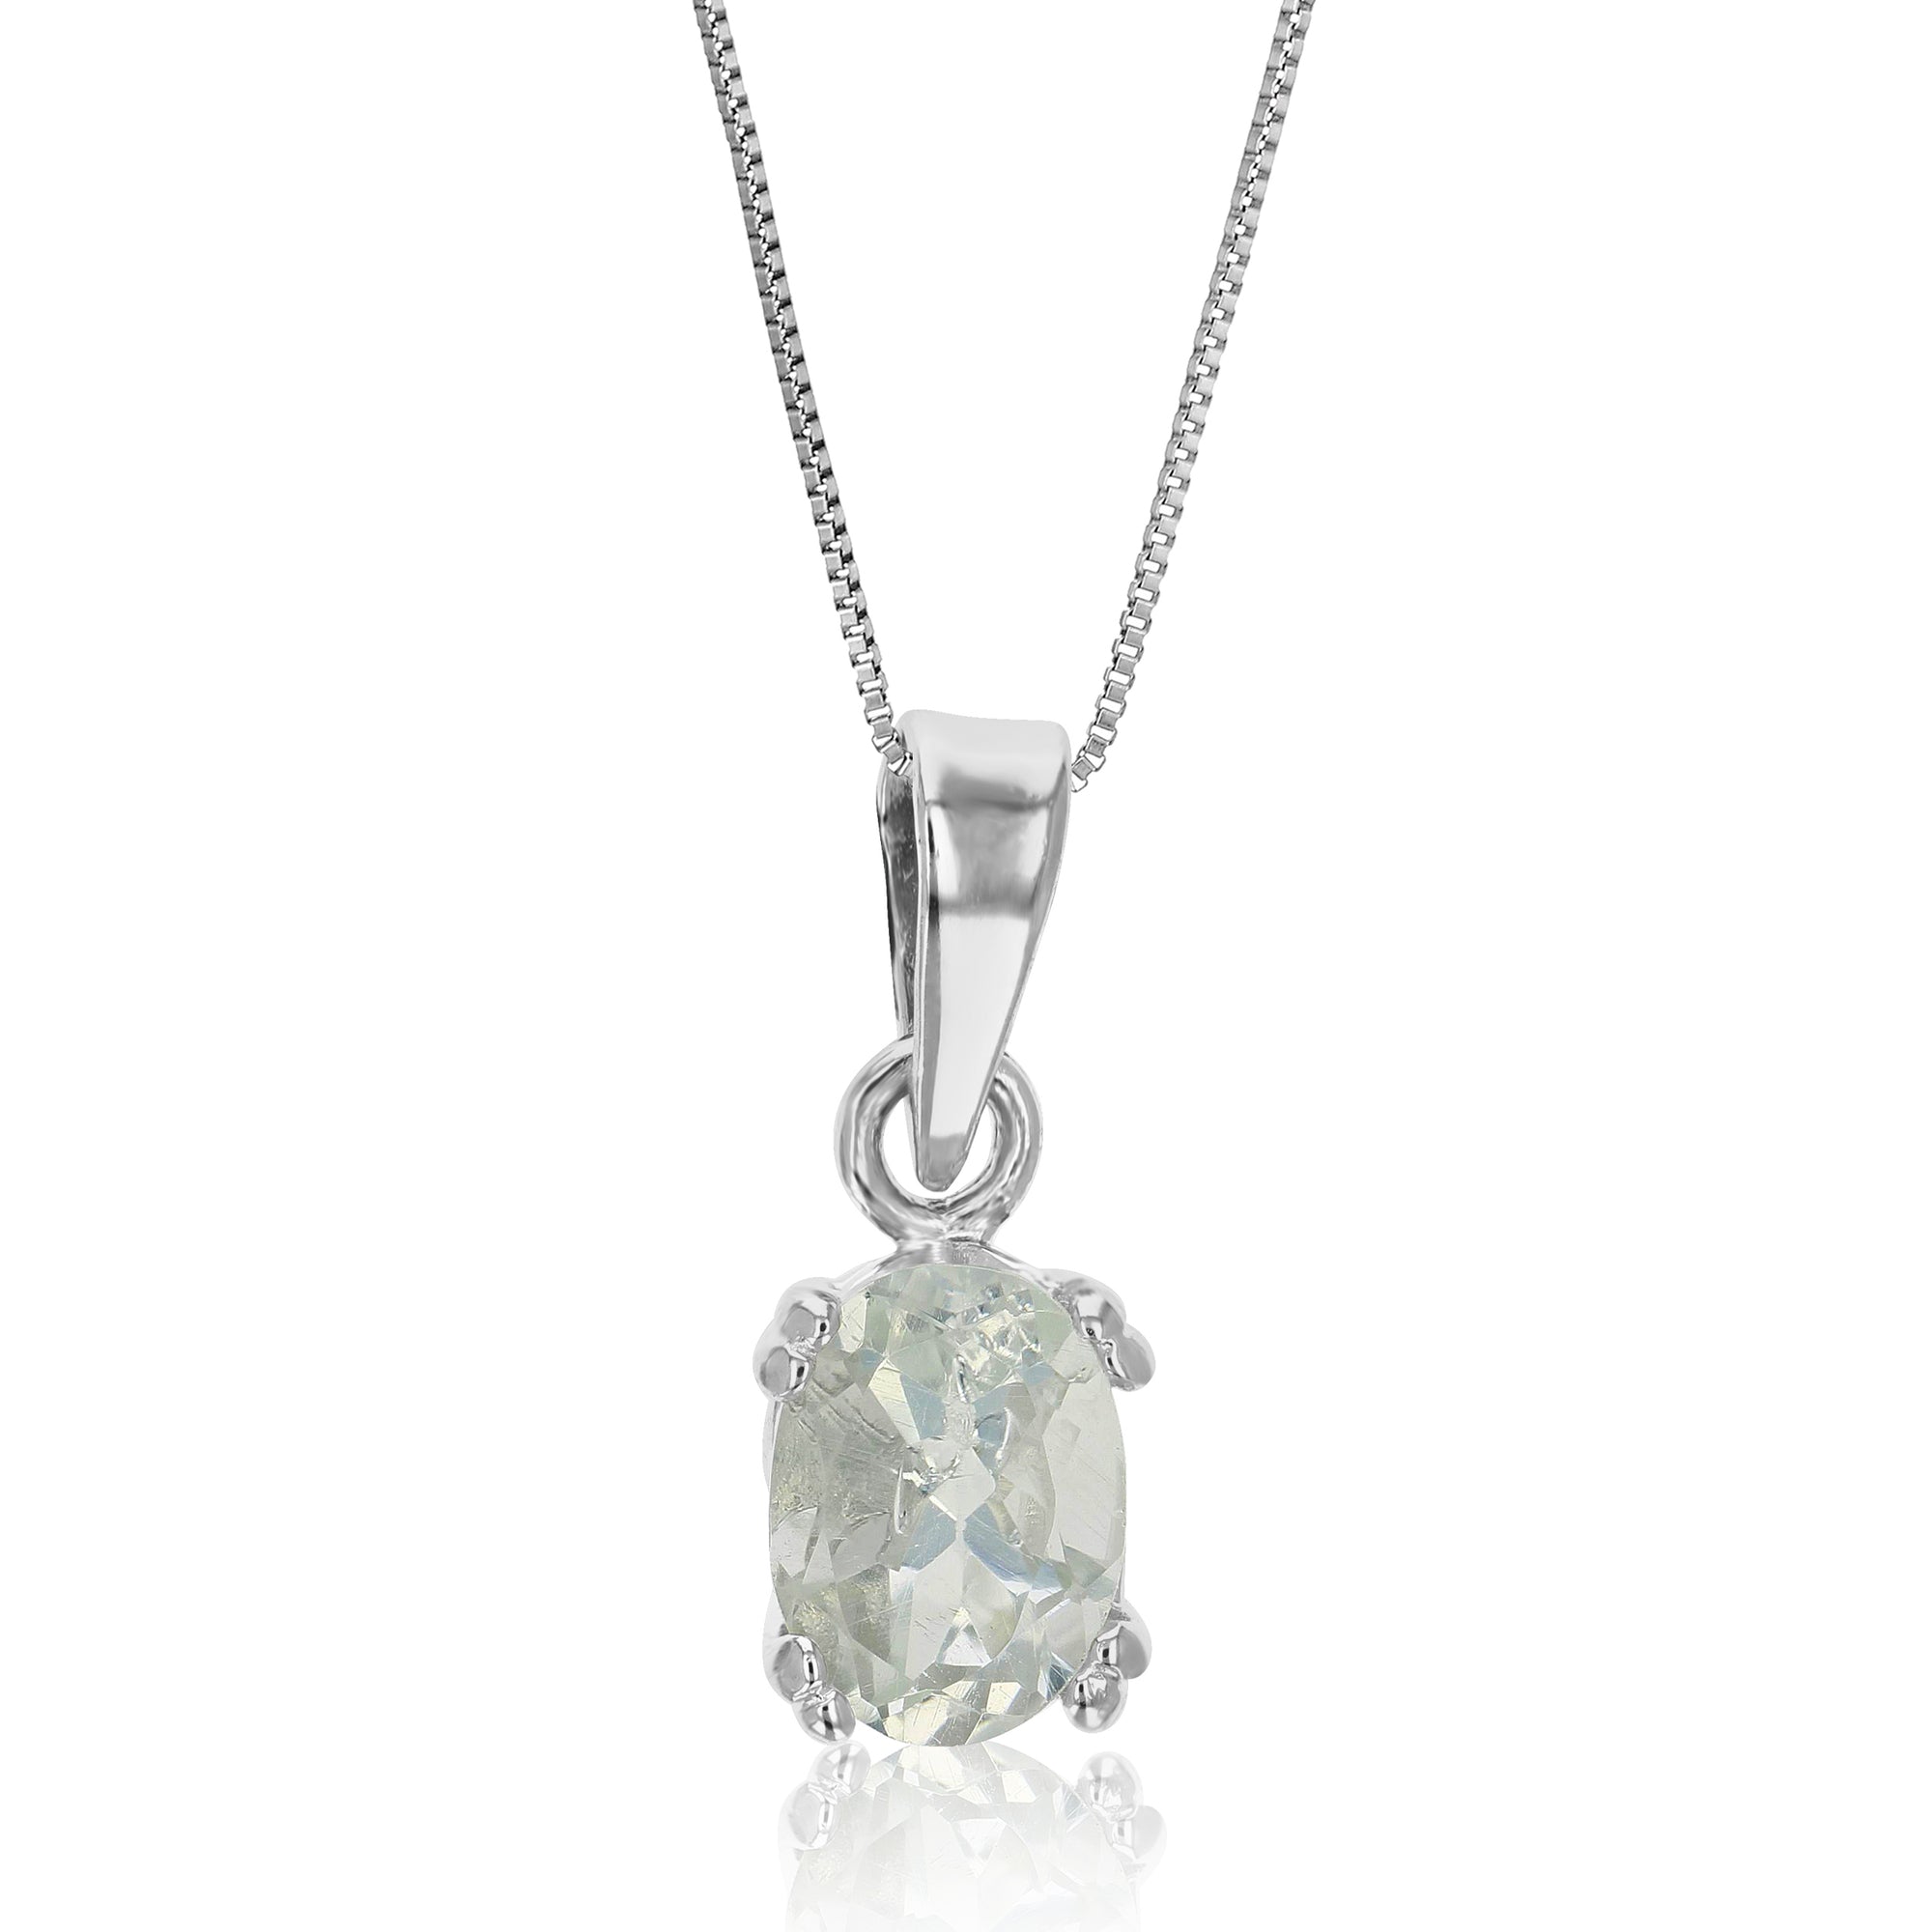 0.70 cttw Pendant Necklace, Green Amethyst Oval Pendant Necklace for Women in .925 Sterling Silver with Rhodium, 18 Inch Chain, Prong Setting